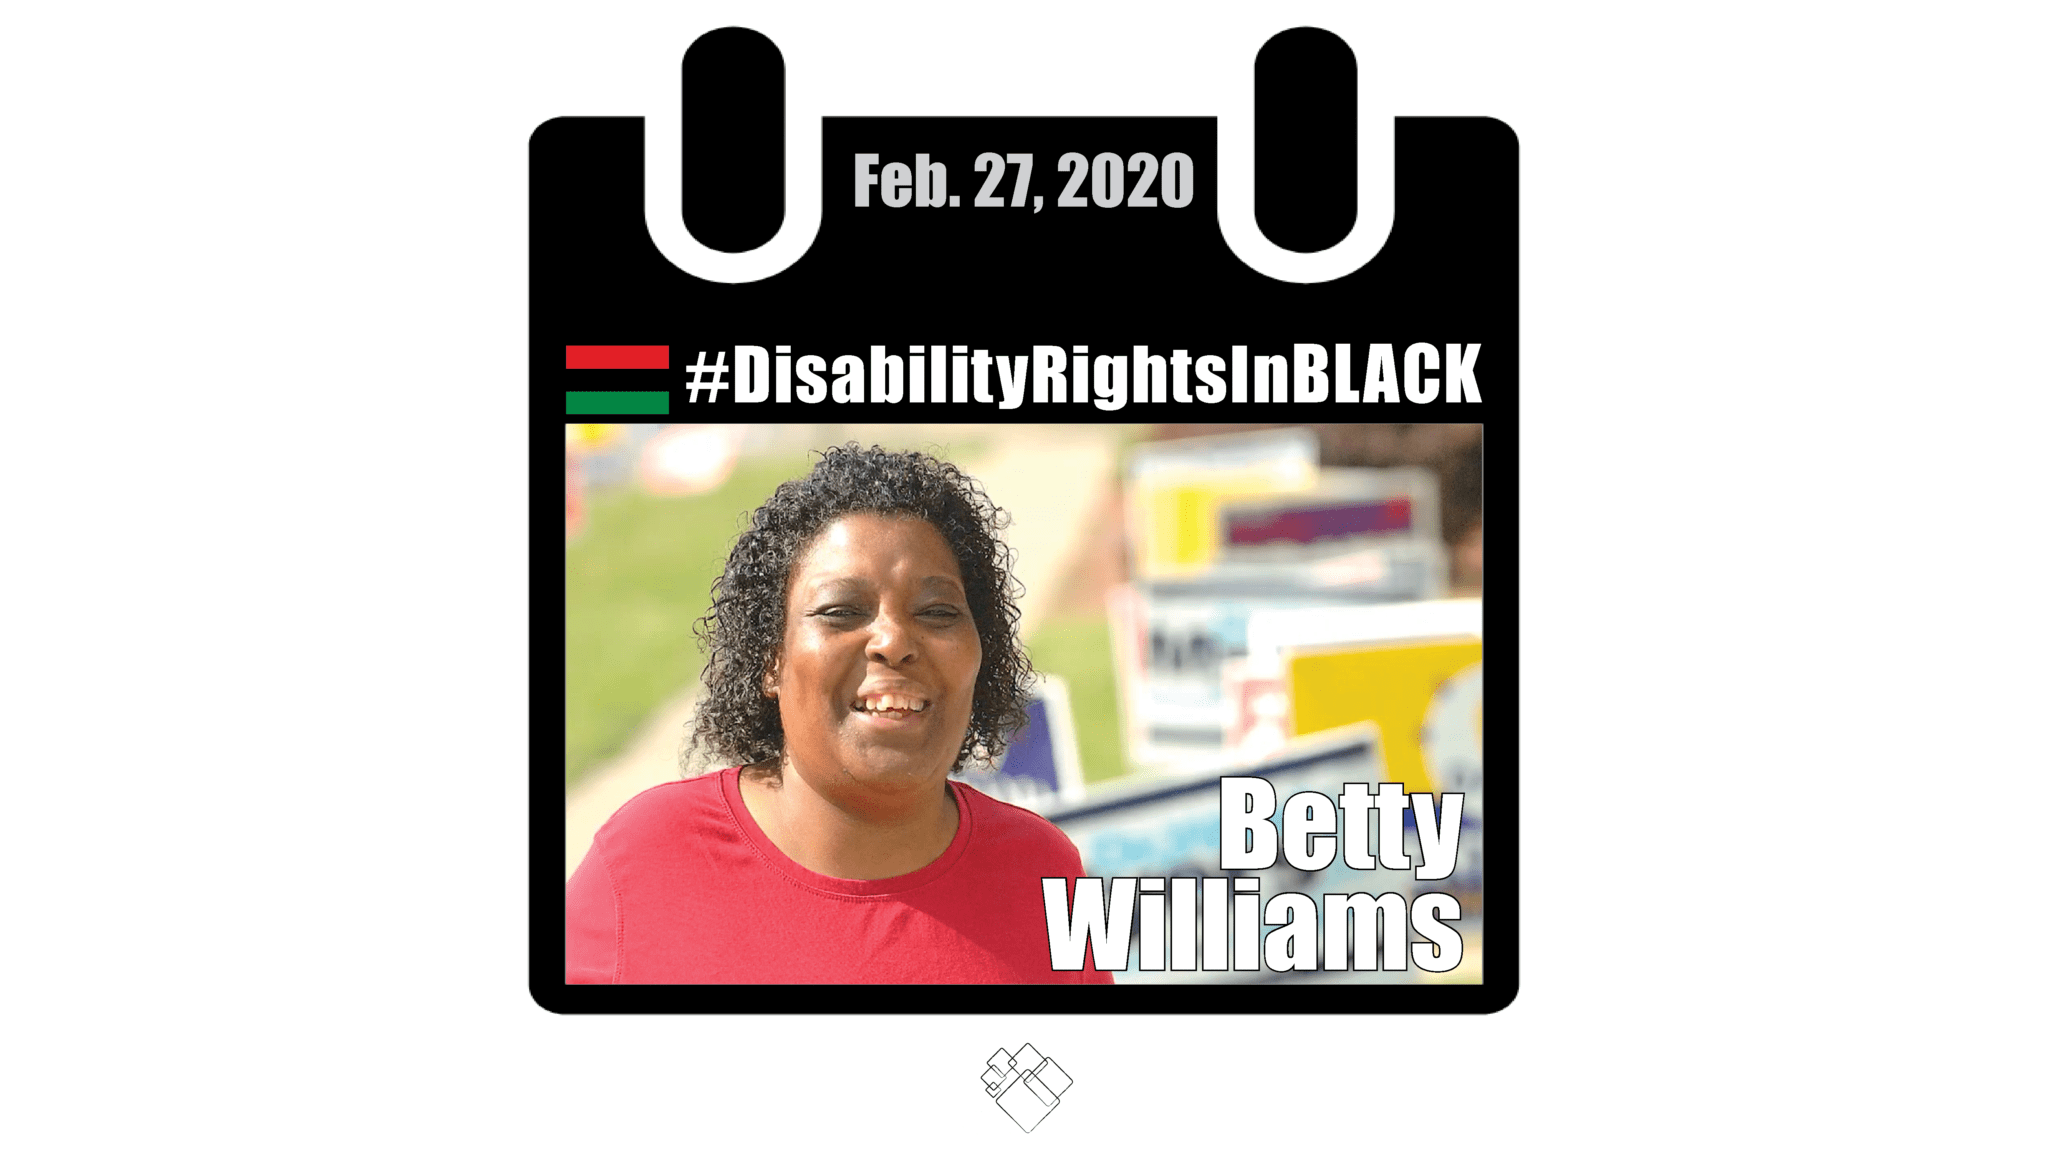 Betty stands outside on a sunny day, wearing a red shirt and smile at the camera. The image of her has the Disability Rights in Black calendar style frame graphic with the hashtag for the series at the top and the date, February 27, 2020.